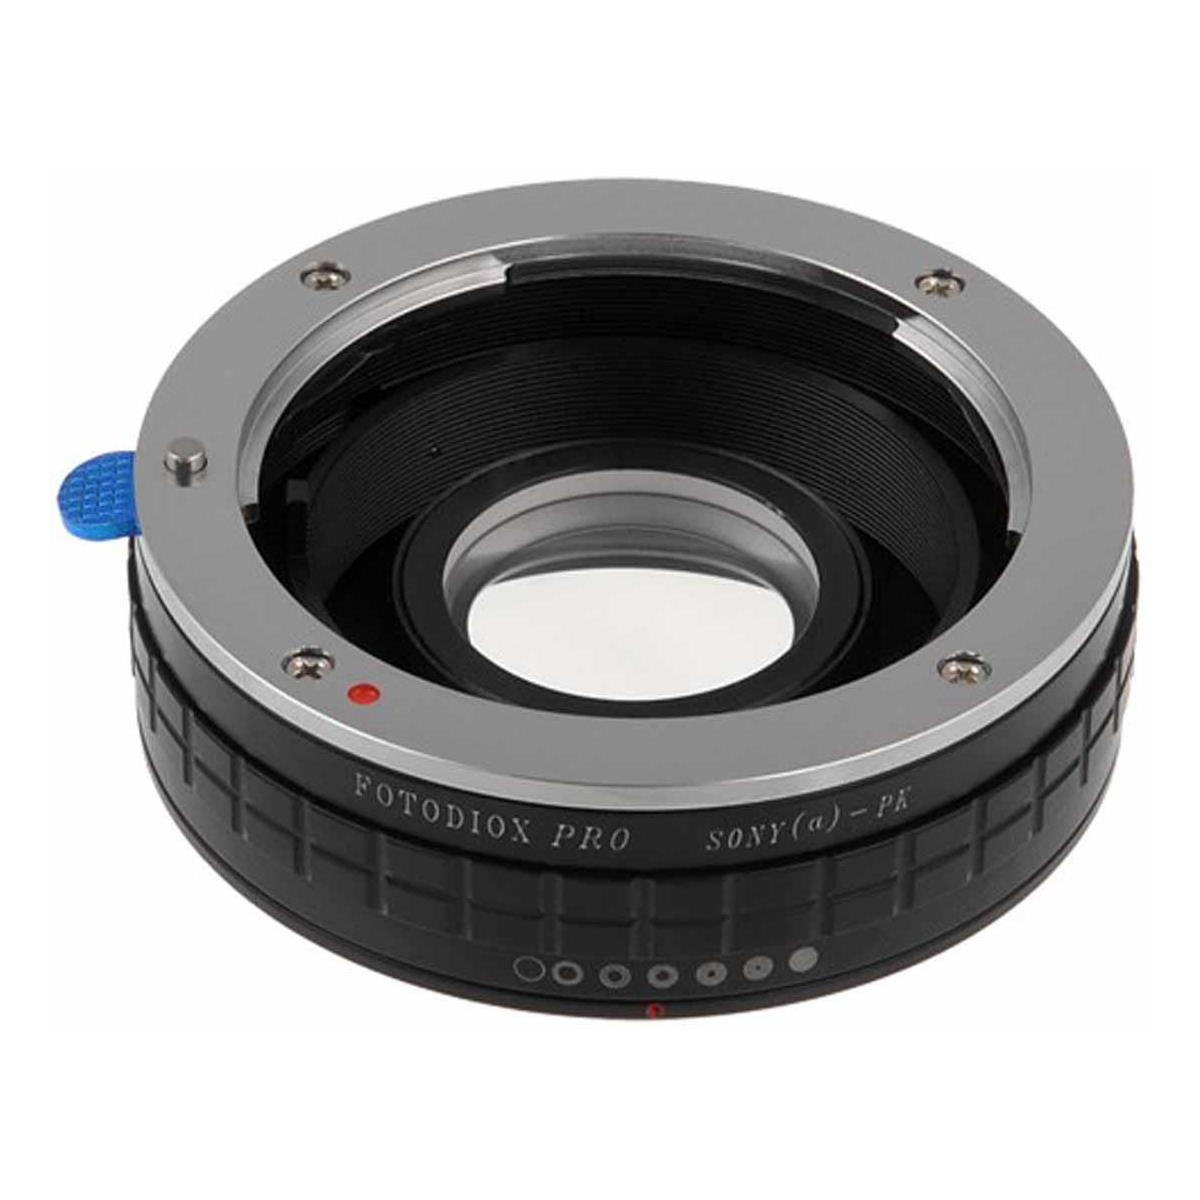 Image of Fotodiox Mount Adapter for Sony A Lens to Pentax K Mount Camera